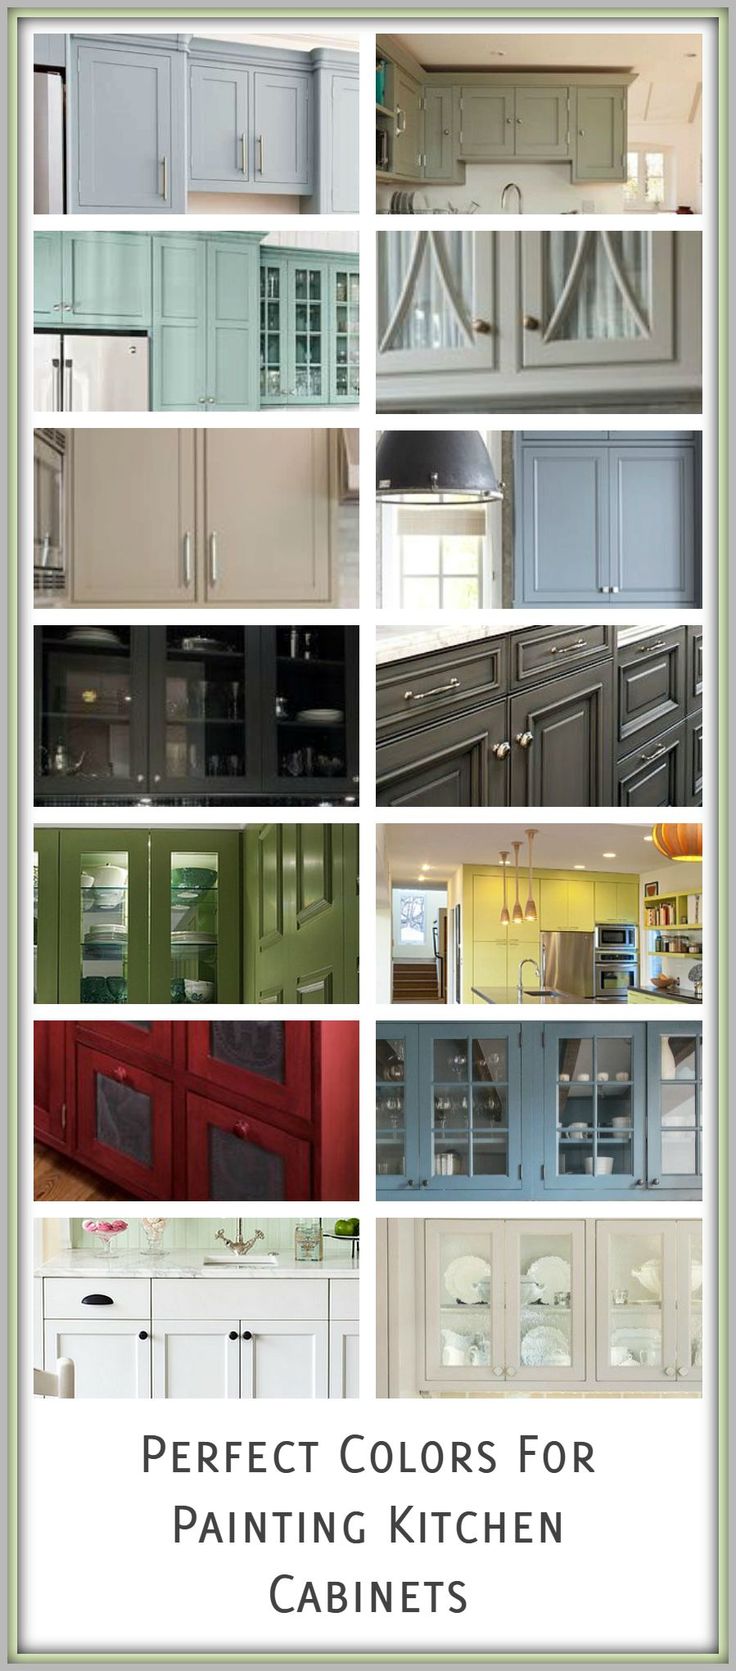 Great Colors for Painting Kitchen Cabinets...